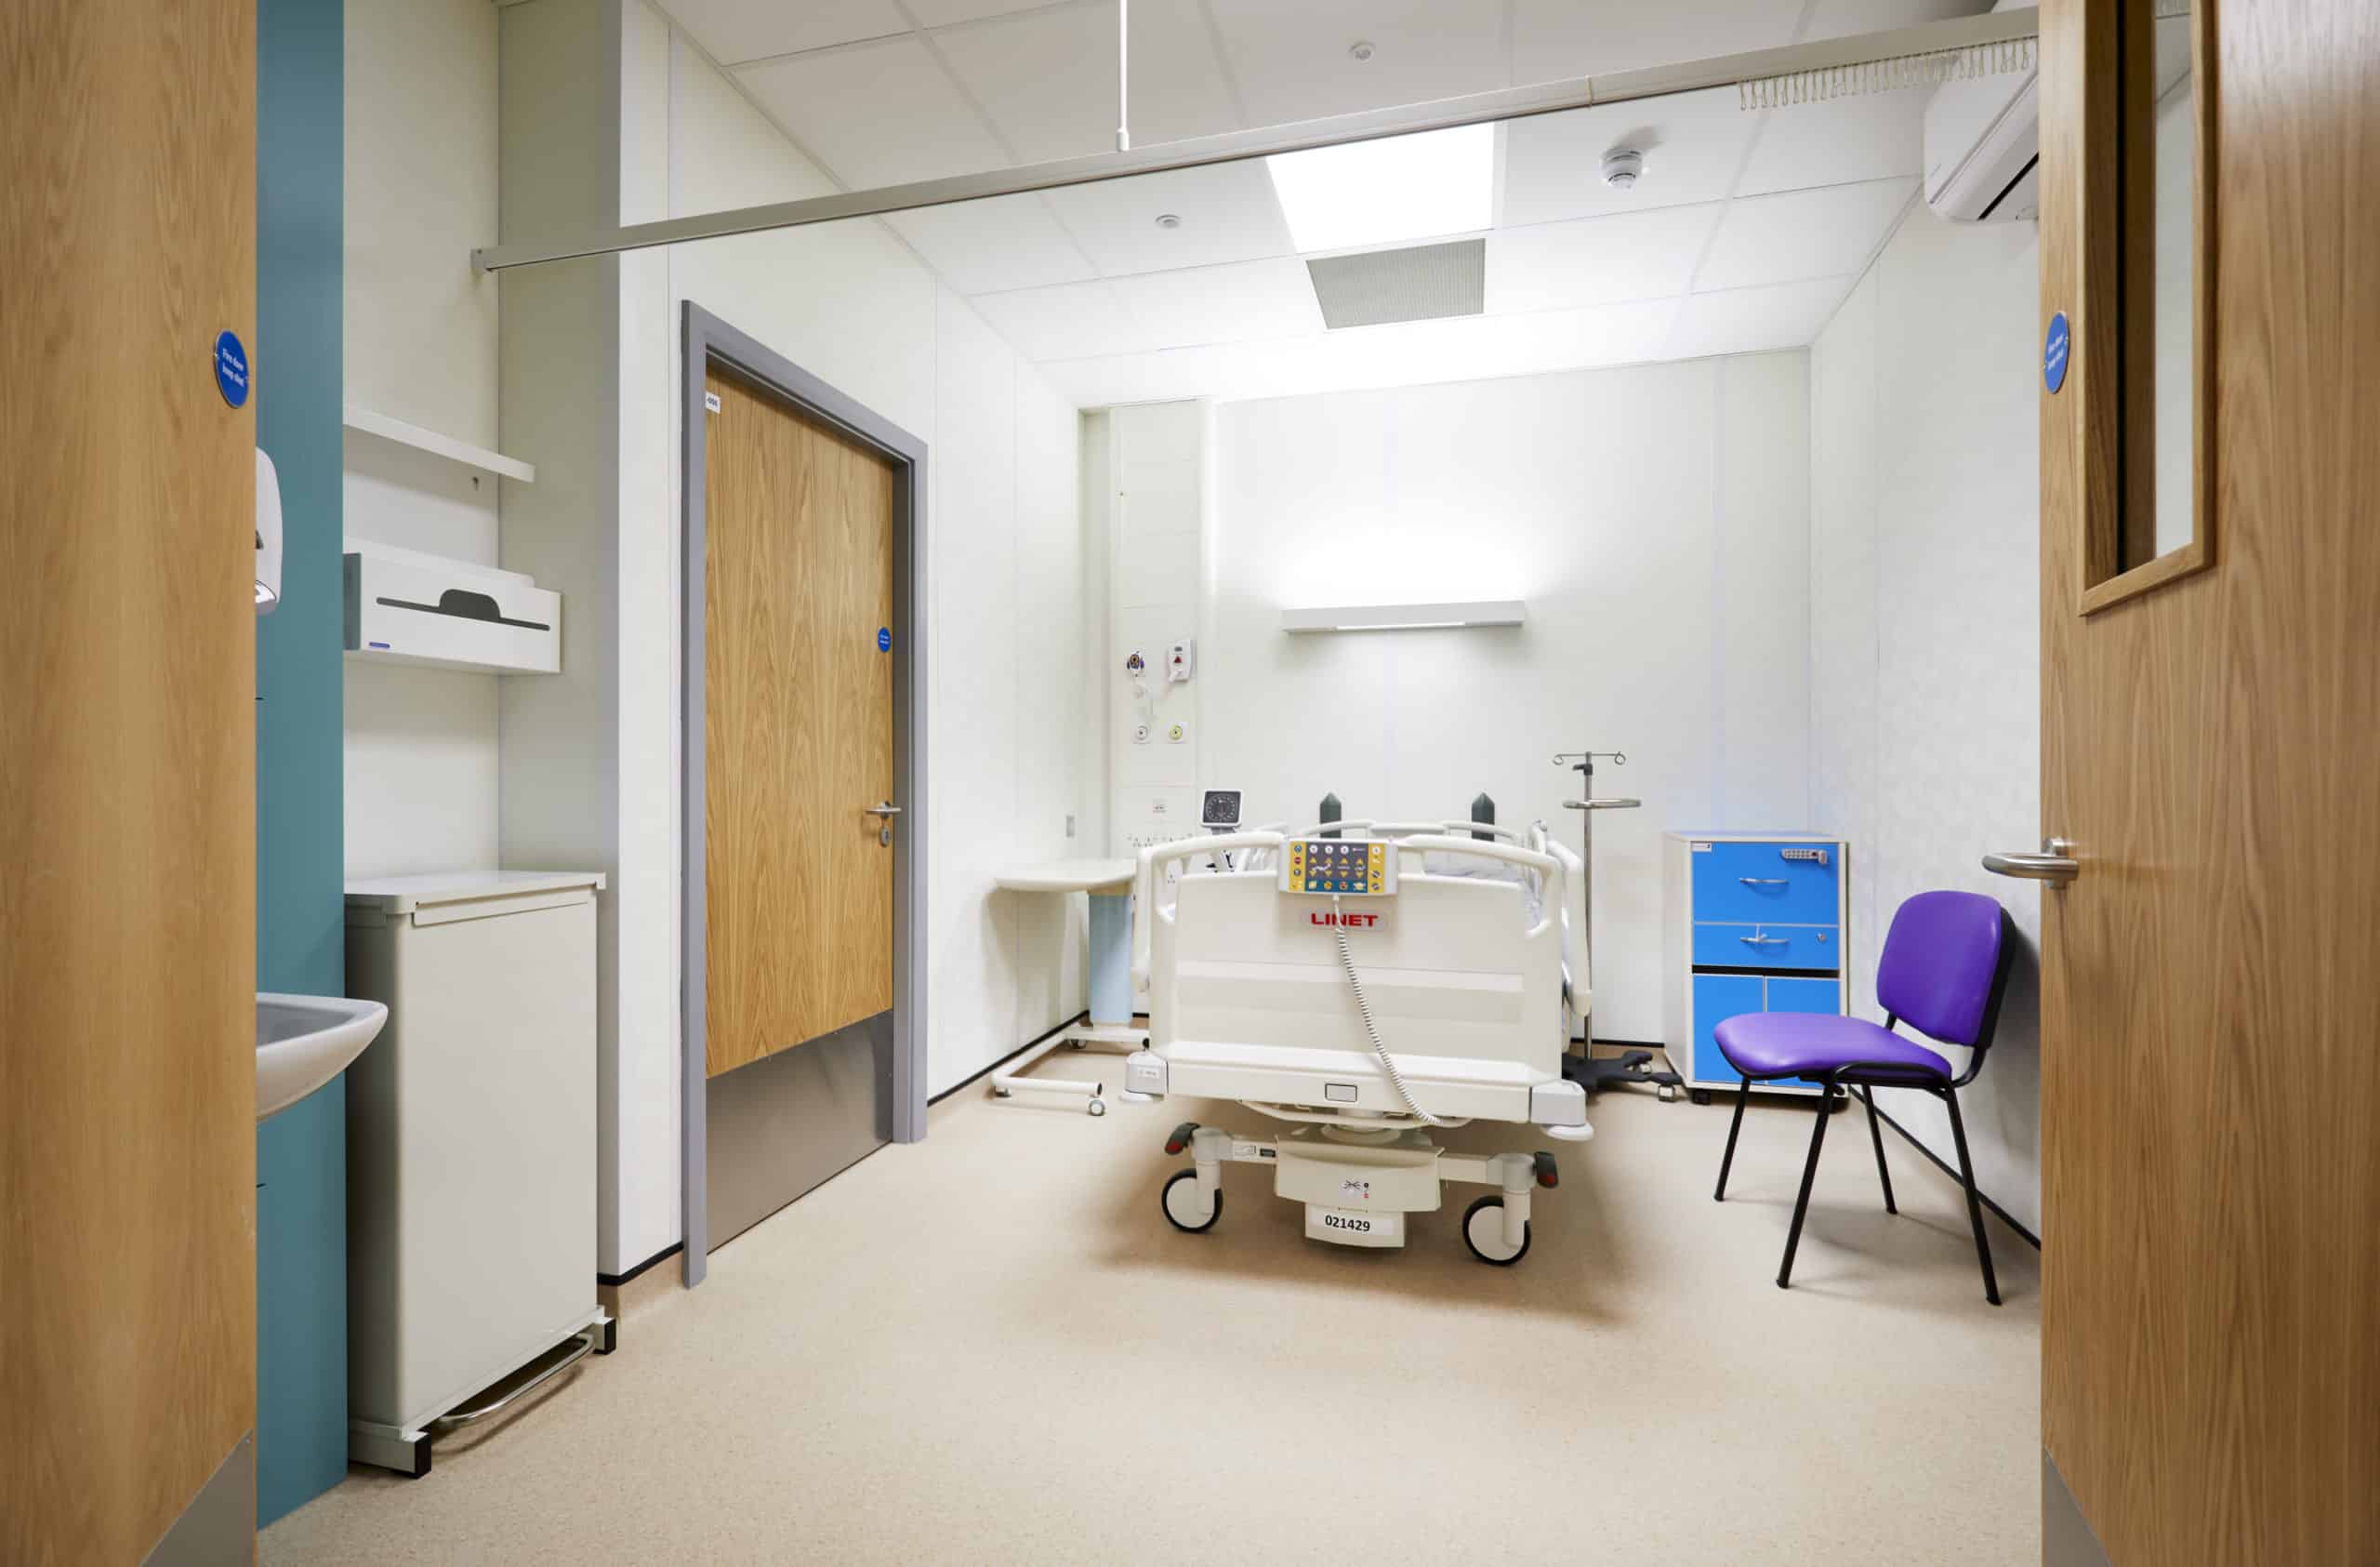 Hospital room inside a modular healthcare building. Hosptial bed, with a chair beside it and a sink.